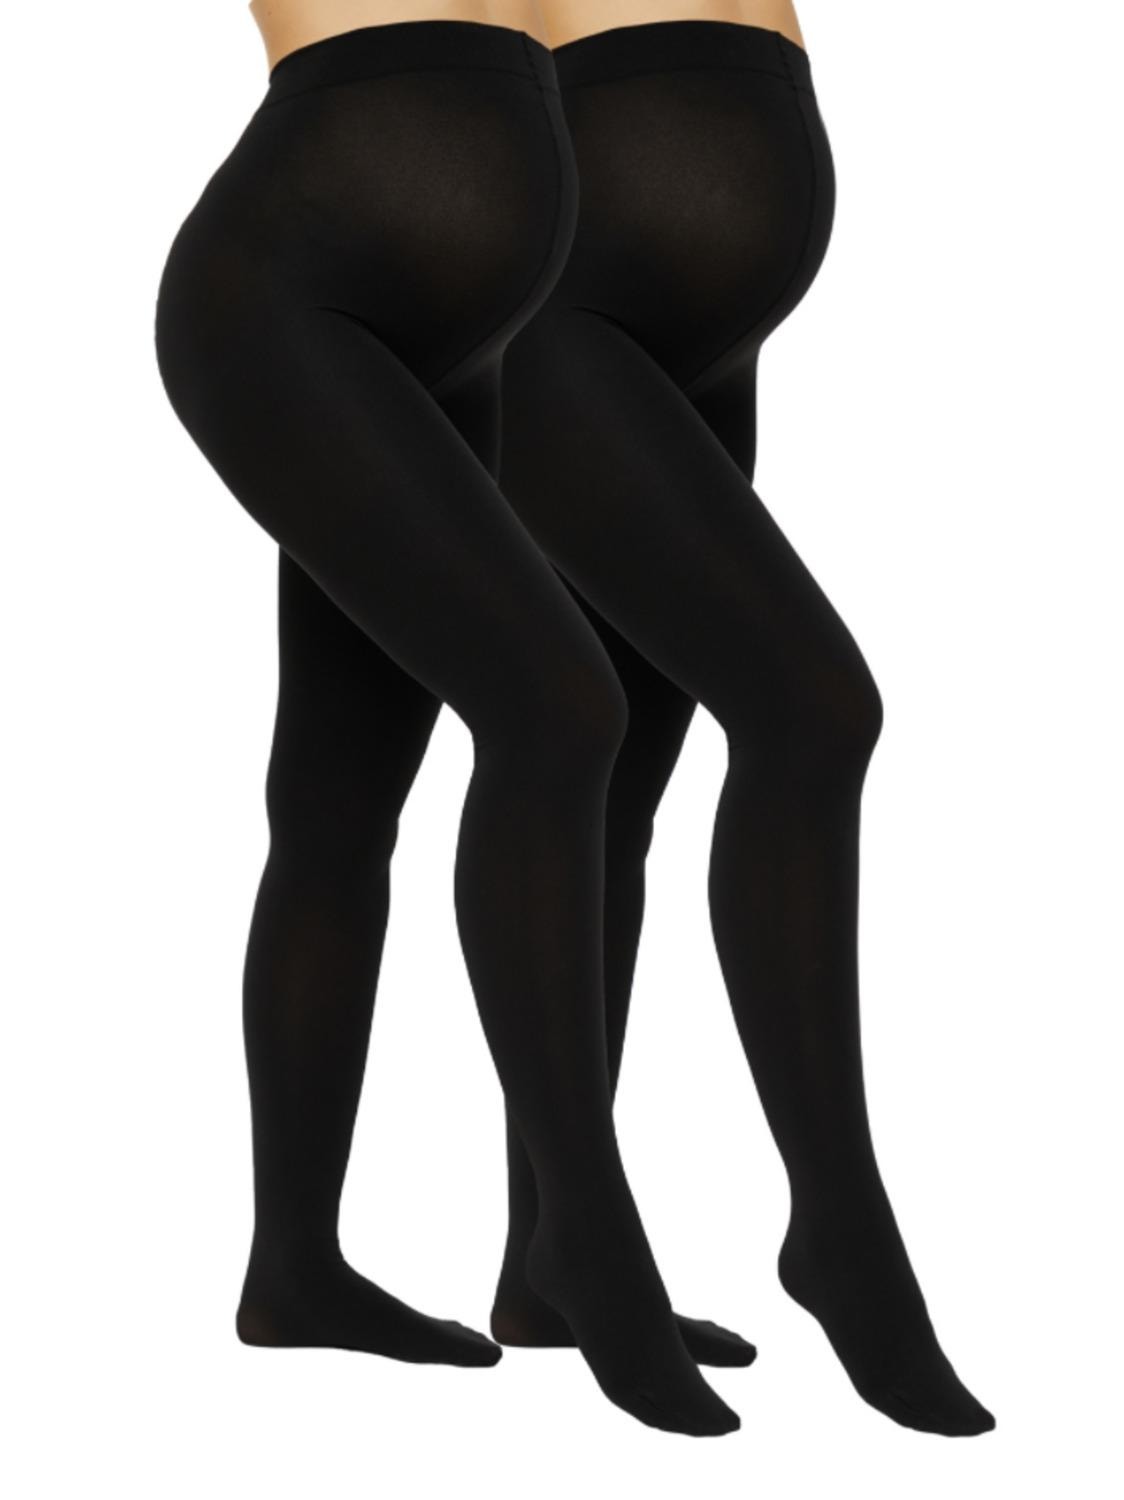 2-Pack Opaque Tights